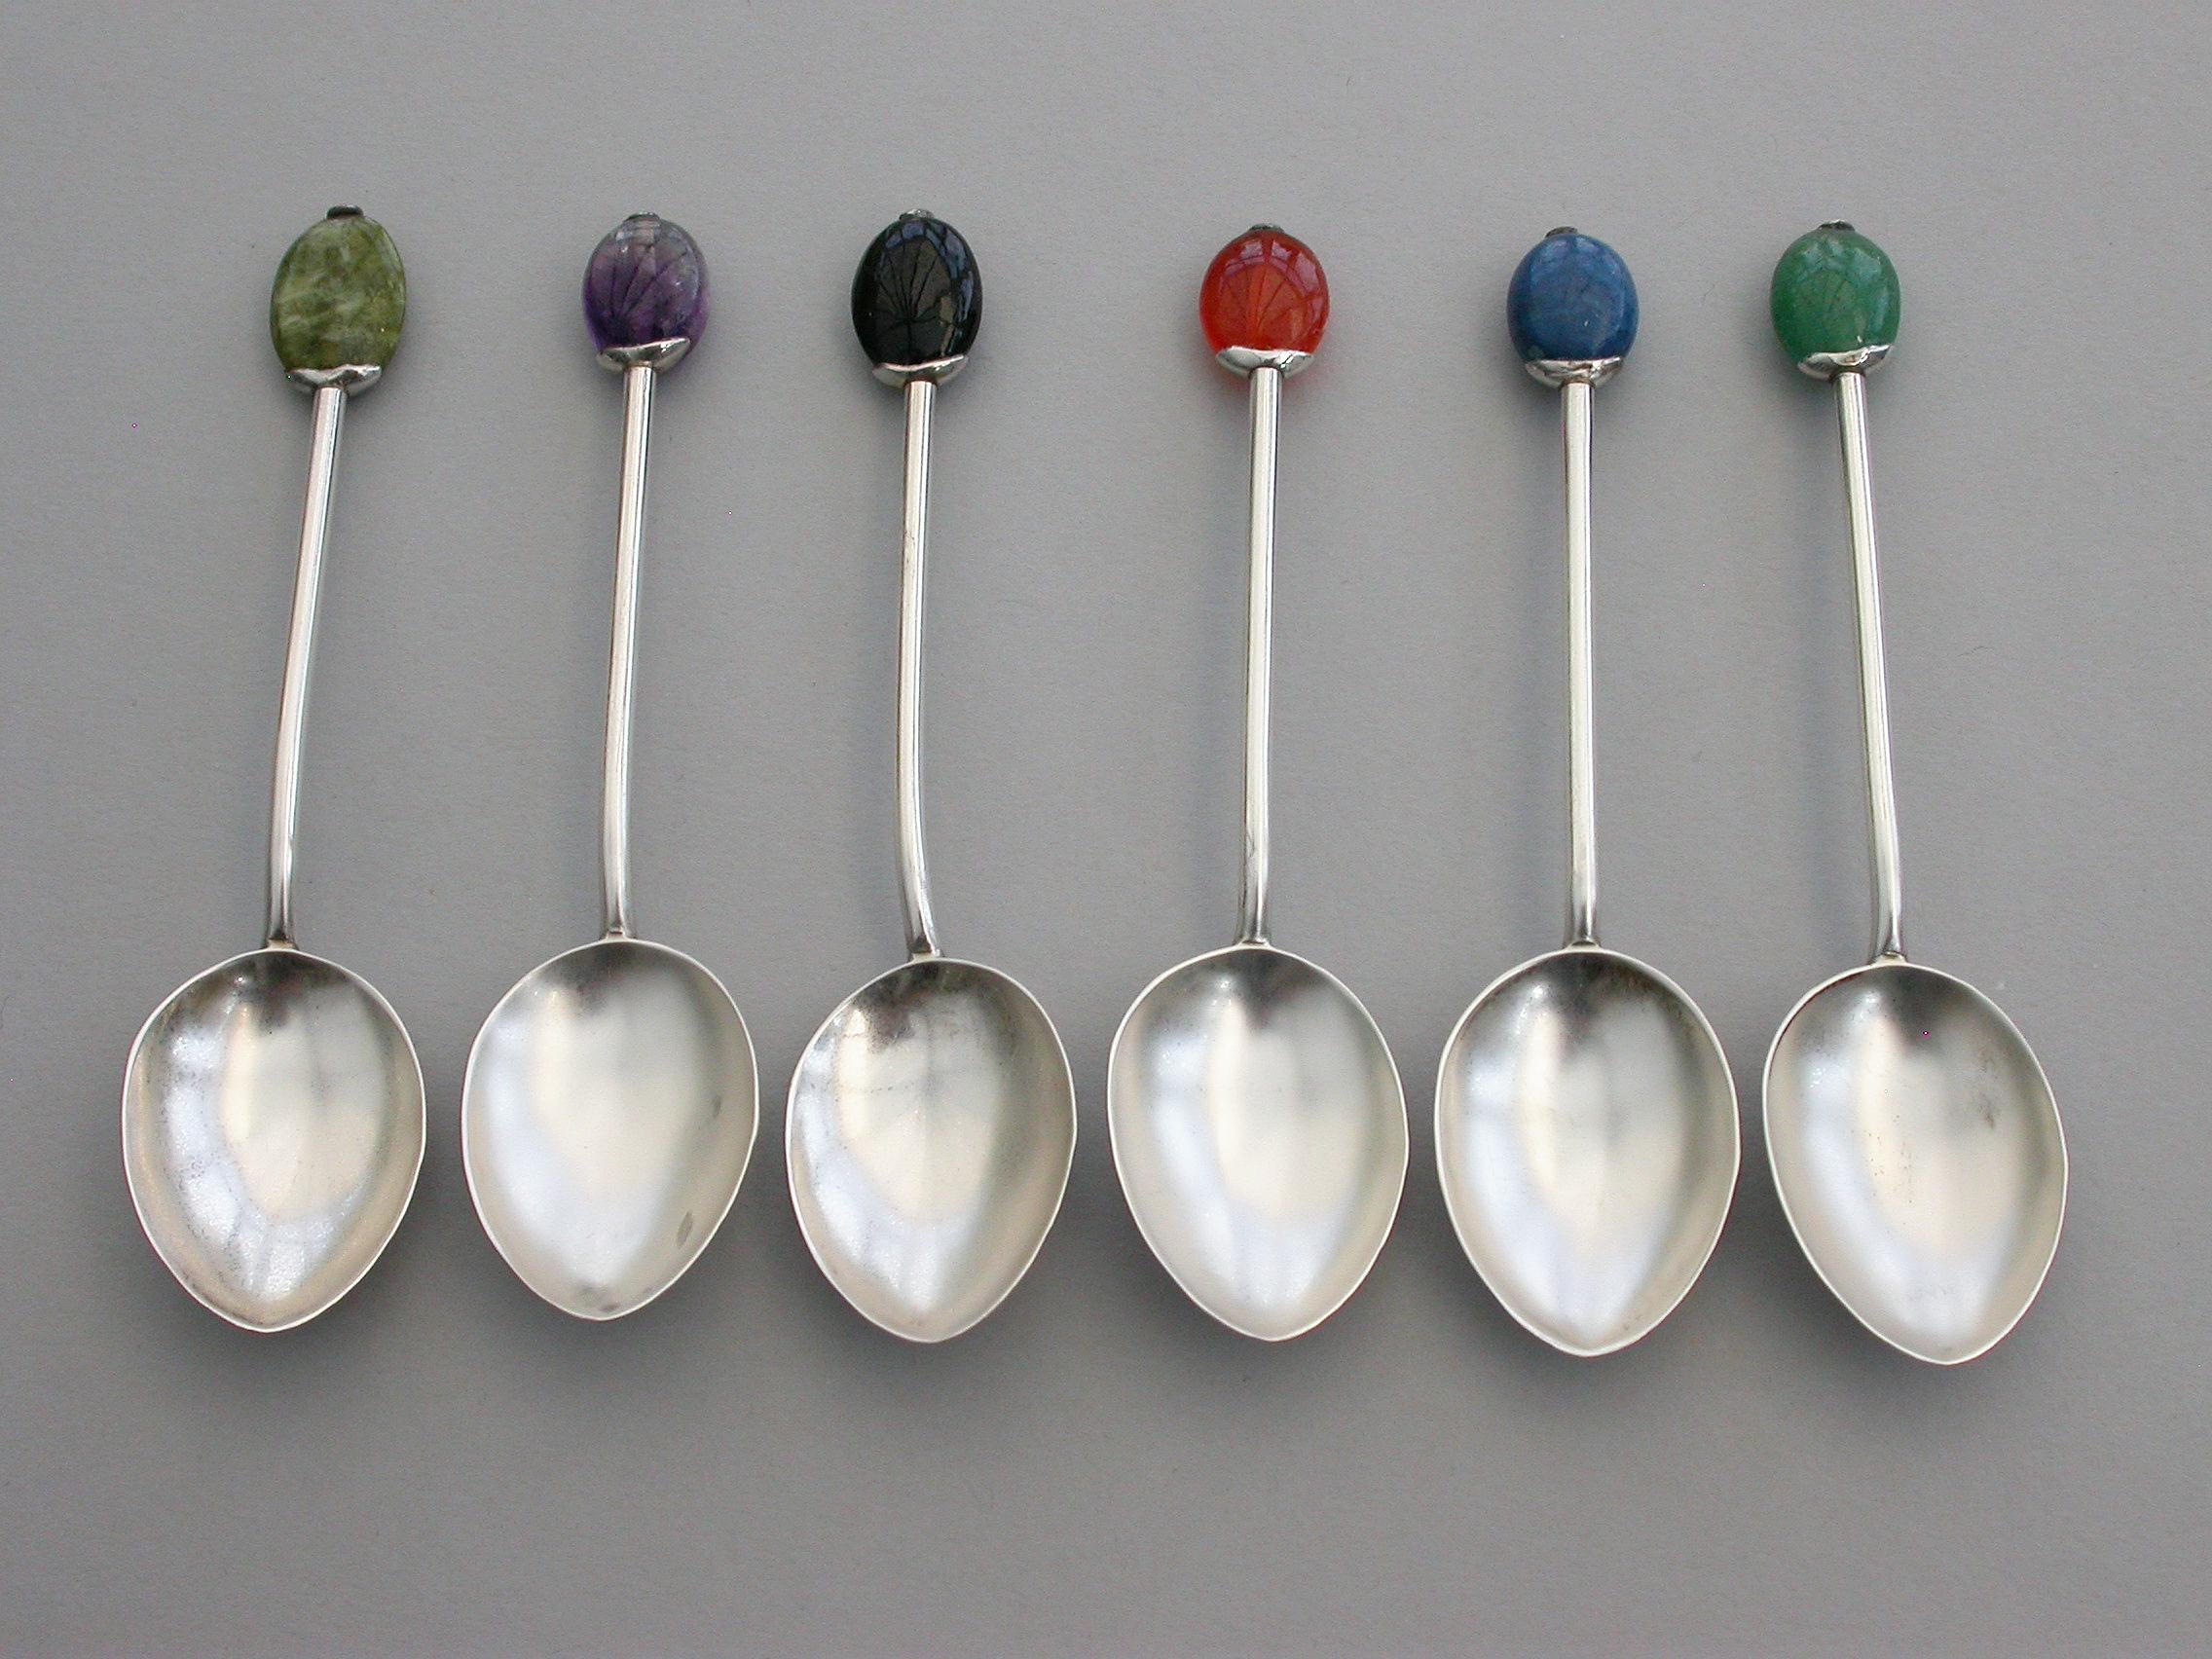 Cased Set of 6 Hardstone Coffee-Bean Spoons, Liberty & Co, Birmingham, 1927-1928 In Good Condition For Sale In Sittingbourne, Kent